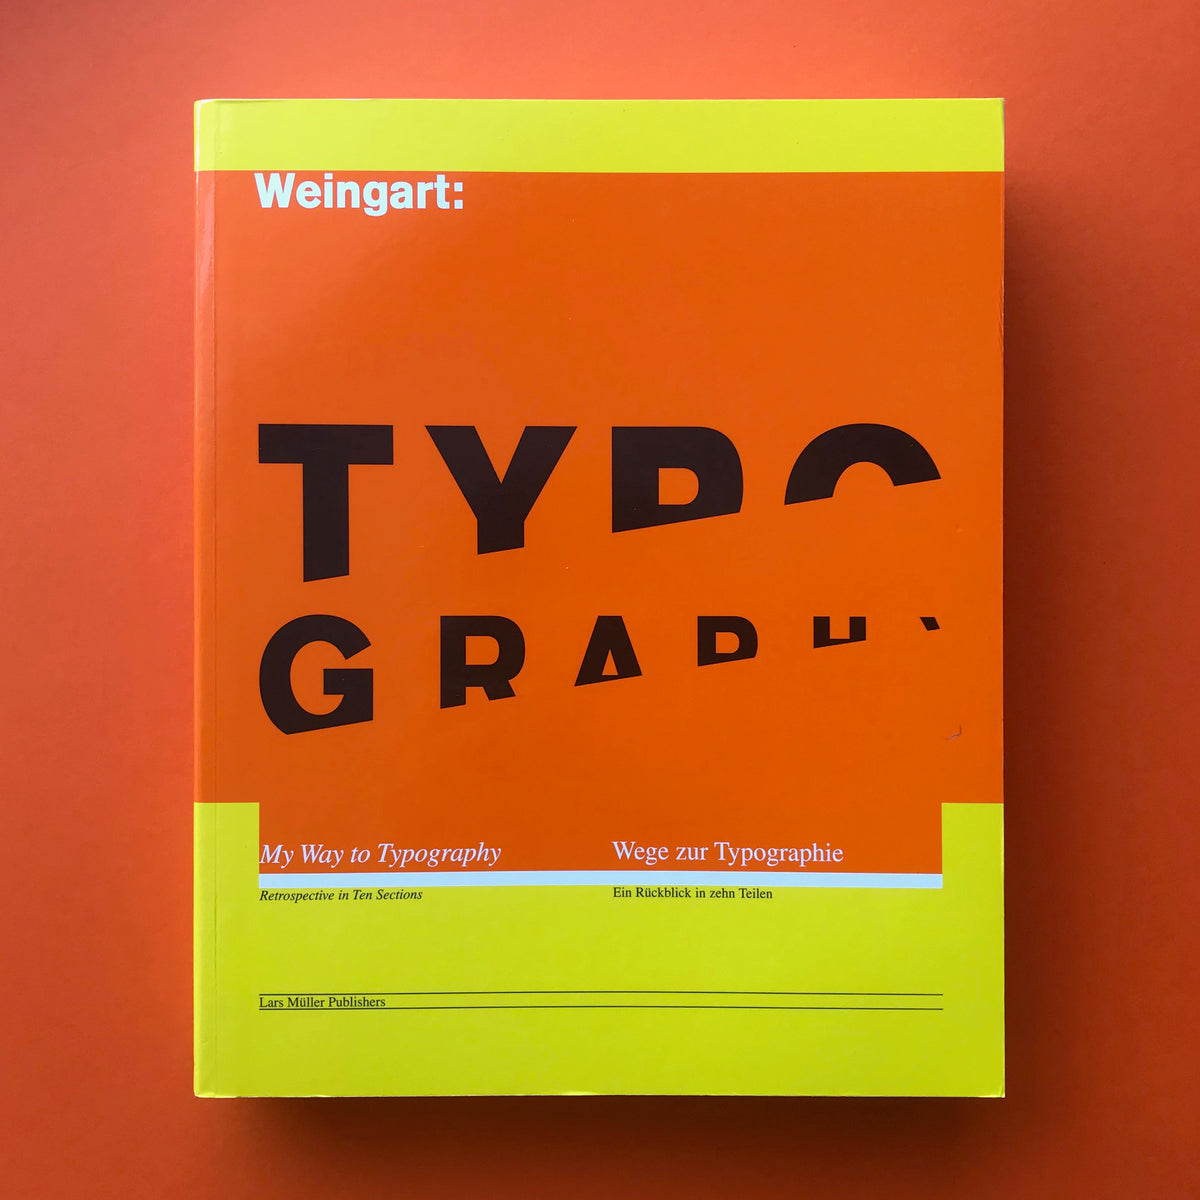 Wolfgang Weingart: My Way to Typography – The Print Arkive